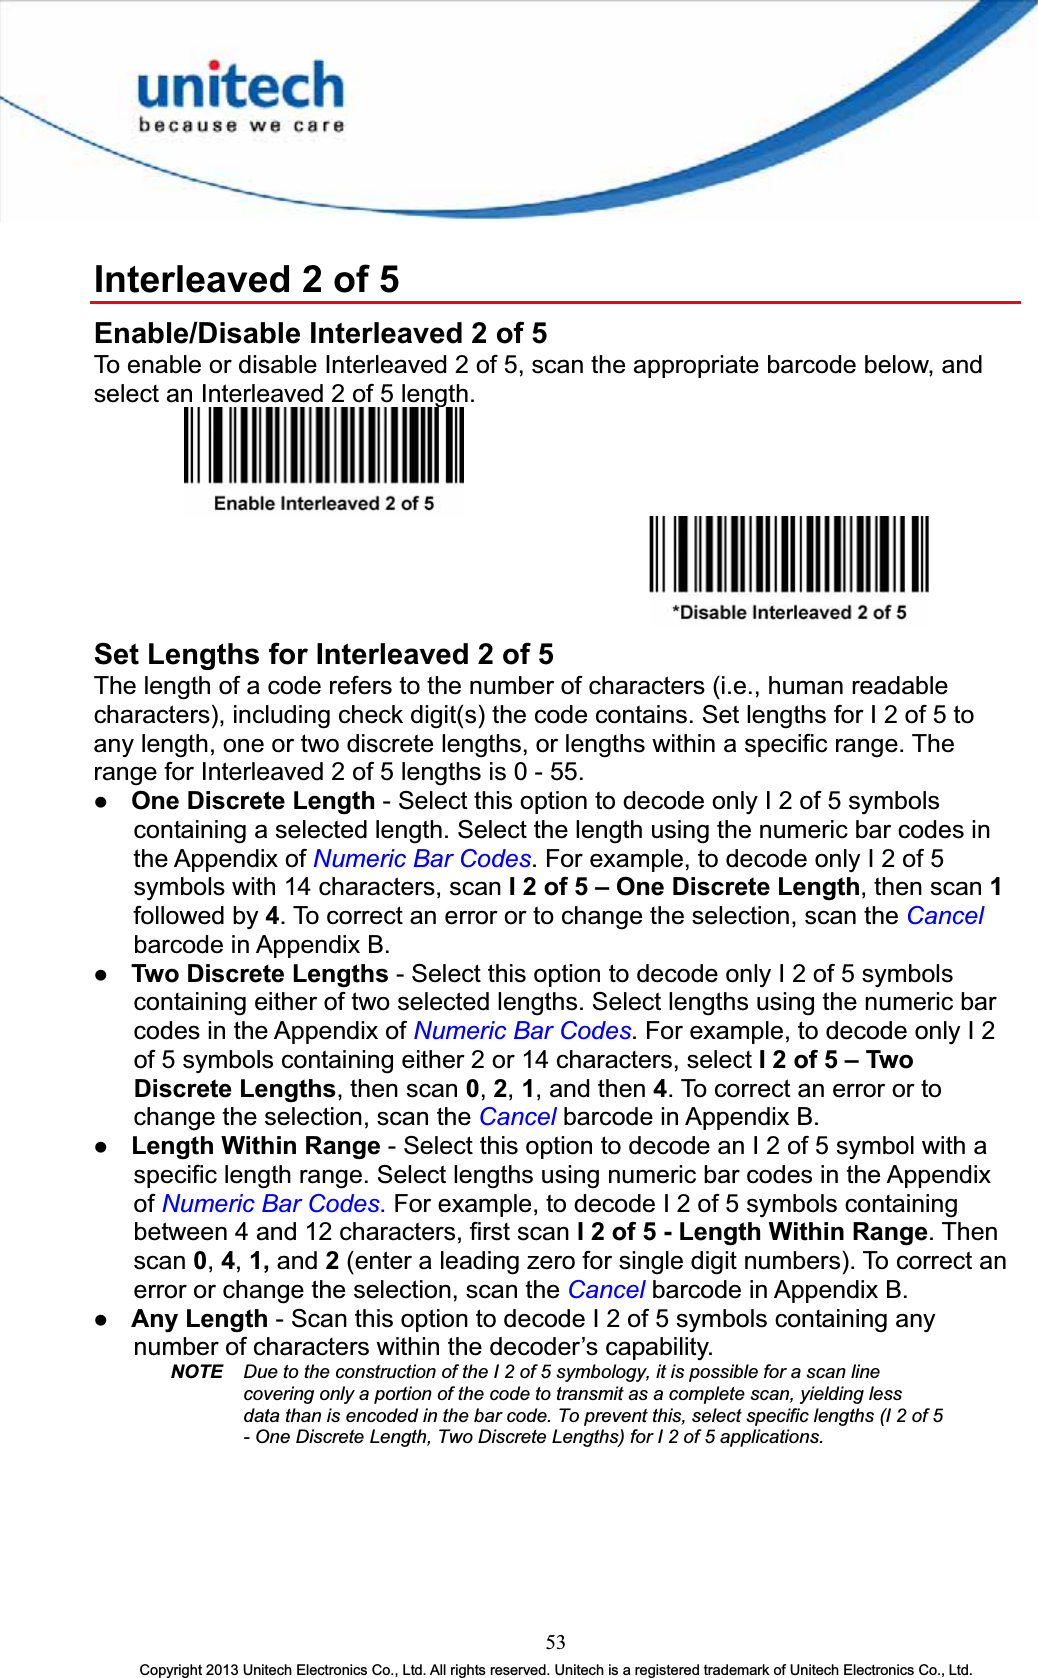 Interleaved 2 of 5 Enable/Disable Interleaved 2 of 5 To enable or disable Interleaved 2 of 5, scan the appropriate barcode below, and select an Interleaved 2 of 5 length. Set Lengths for Interleaved 2 of 5 The length of a code refers to the number of characters (i.e., human readable characters), including check digit(s) the code contains. Set lengths for I 2 of 5 to any length, one or two discrete lengths, or lengths within a specific range. The range for Interleaved 2 of 5 lengths is 0 - 55. z One Discrete Length - Select this option to decode only I 2 of 5 symbols containing a selected length. Select the length using the numeric bar codes in the Appendix of Numeric Bar Codes. For example, to decode only I 2 of 5 symbols with 14 characters, scan I 2 of 5 – One Discrete Length, then scan 1followed by 4. To correct an error or to change the selection, scan the Cancelbarcode in Appendix B. z Two Discrete Lengths - Select this option to decode only I 2 of 5 symbols containing either of two selected lengths. Select lengths using the numeric bar codes in the Appendix of Numeric Bar Codes. For example, to decode only I 2 of 5 symbols containing either 2 or 14 characters, select I 2 of 5 – Two Discrete Lengths, then scan 0,2,1, and then 4. To correct an error or to change the selection, scan the Cancel barcode in Appendix B. z Length Within Range - Select this option to decode an I 2 of 5 symbol with a specific length range. Select lengths using numeric bar codes in the Appendix of Numeric Bar Codes.For example, to decode I 2 of 5 symbols containing between 4 and 12 characters, first scan I 2 of 5 - Length Within Range. Then scan 0,4,1, and 2(enter a leading zero for single digit numbers). To correct an error or change the selection, scan the Cancel barcode in Appendix B. z Any Length - Scan this option to decode I 2 of 5 symbols containing any number of characters within the decoder’s capability. NOTE Due to the construction of the I 2 of 5 symbology, it is possible for a scan line covering only a portion of the code to transmit as a complete scan, yielding less data than is encoded in the bar code. To prevent this, select specific lengths (I 2 of 5 - One Discrete Length, Two Discrete Lengths) for I 2 of 5 applications. 53Copyright 2013 Unitech Electronics Co., Ltd. All rights reserved. Unitech is a registered trademark of Unitech Electronics Co., Ltd. 